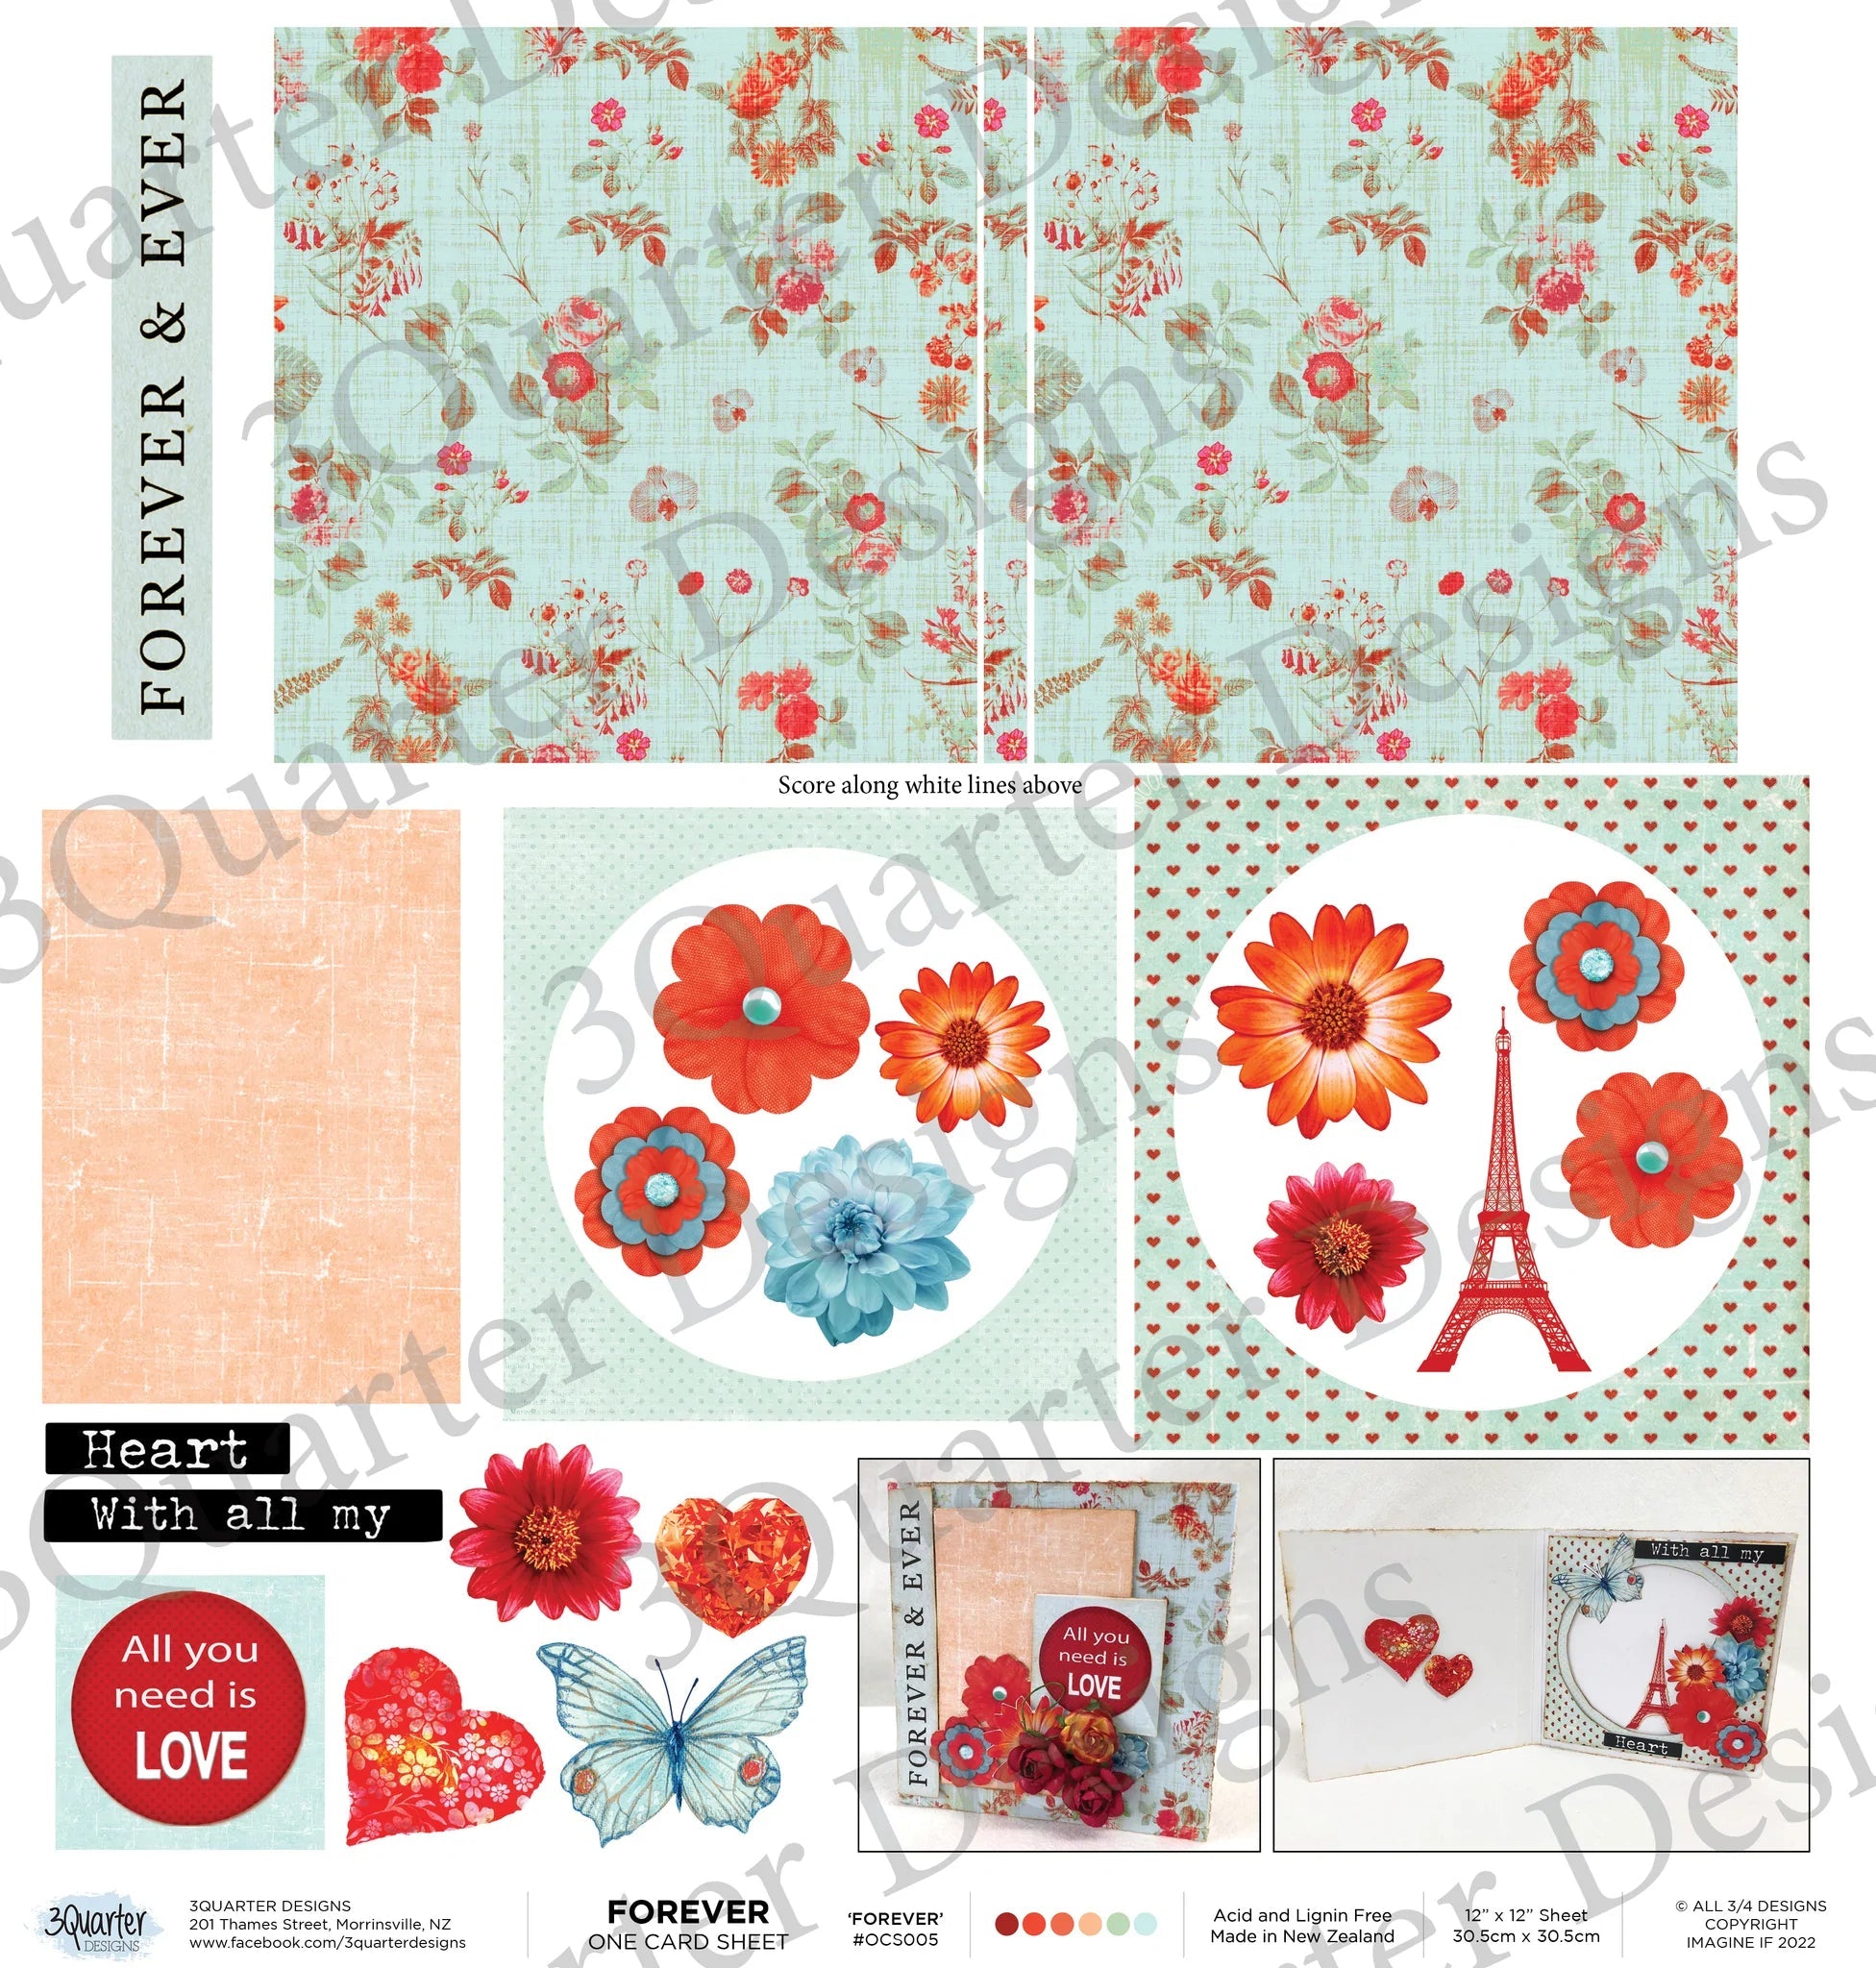 3Quarter Designs - One Card Project Sheet - Forever